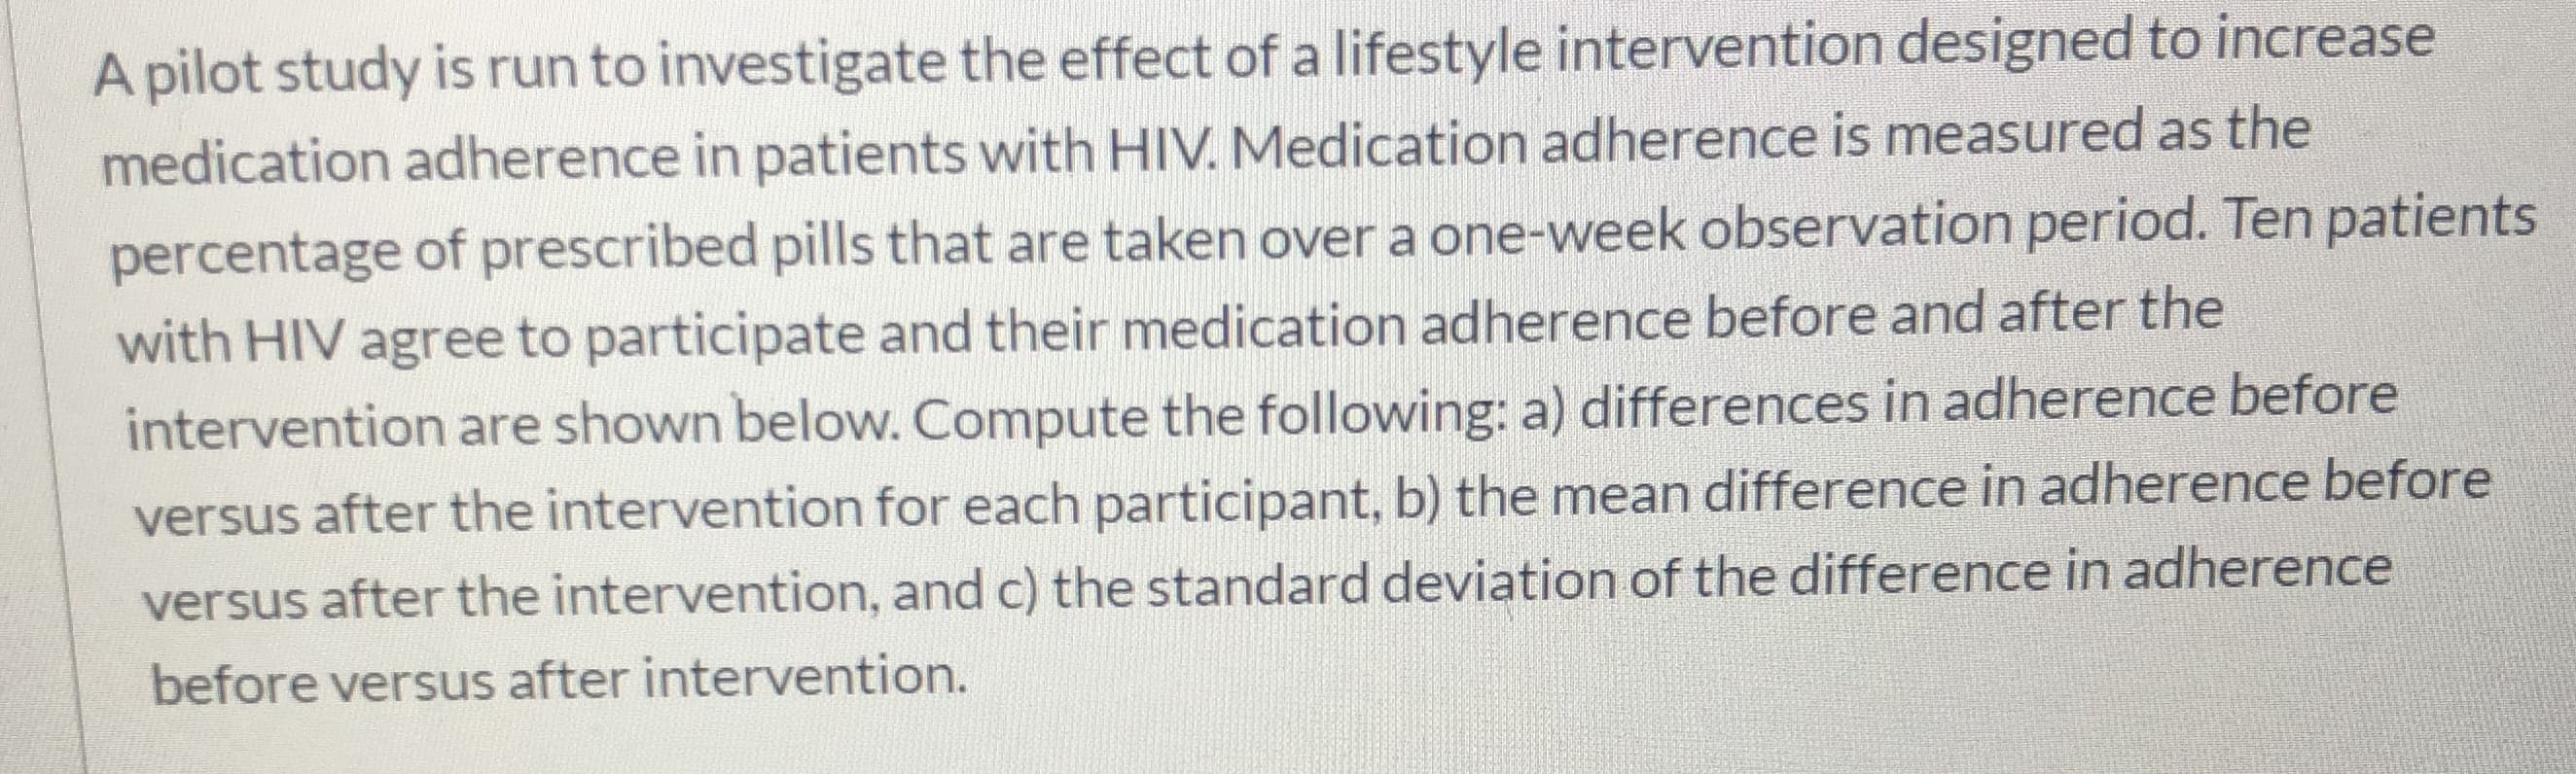 A pilot study is run to investigate the effect of a lifestyle intervention designed to increase
medication adherence in patients with HIV. Medication adherence is measured as the
percentage of prescribed pills that are taken over a one-week observation period. Ten patients
with HIV agree to participate and their medication adherence before and after the
intervention are shown below. Compute the following: a) differences in adherence before
versus after the intervention for each participant, b) the mean difference in adherence before
versus after the intervention, and c) the standard deviation of the difference in adherence
before versus after intervention.
